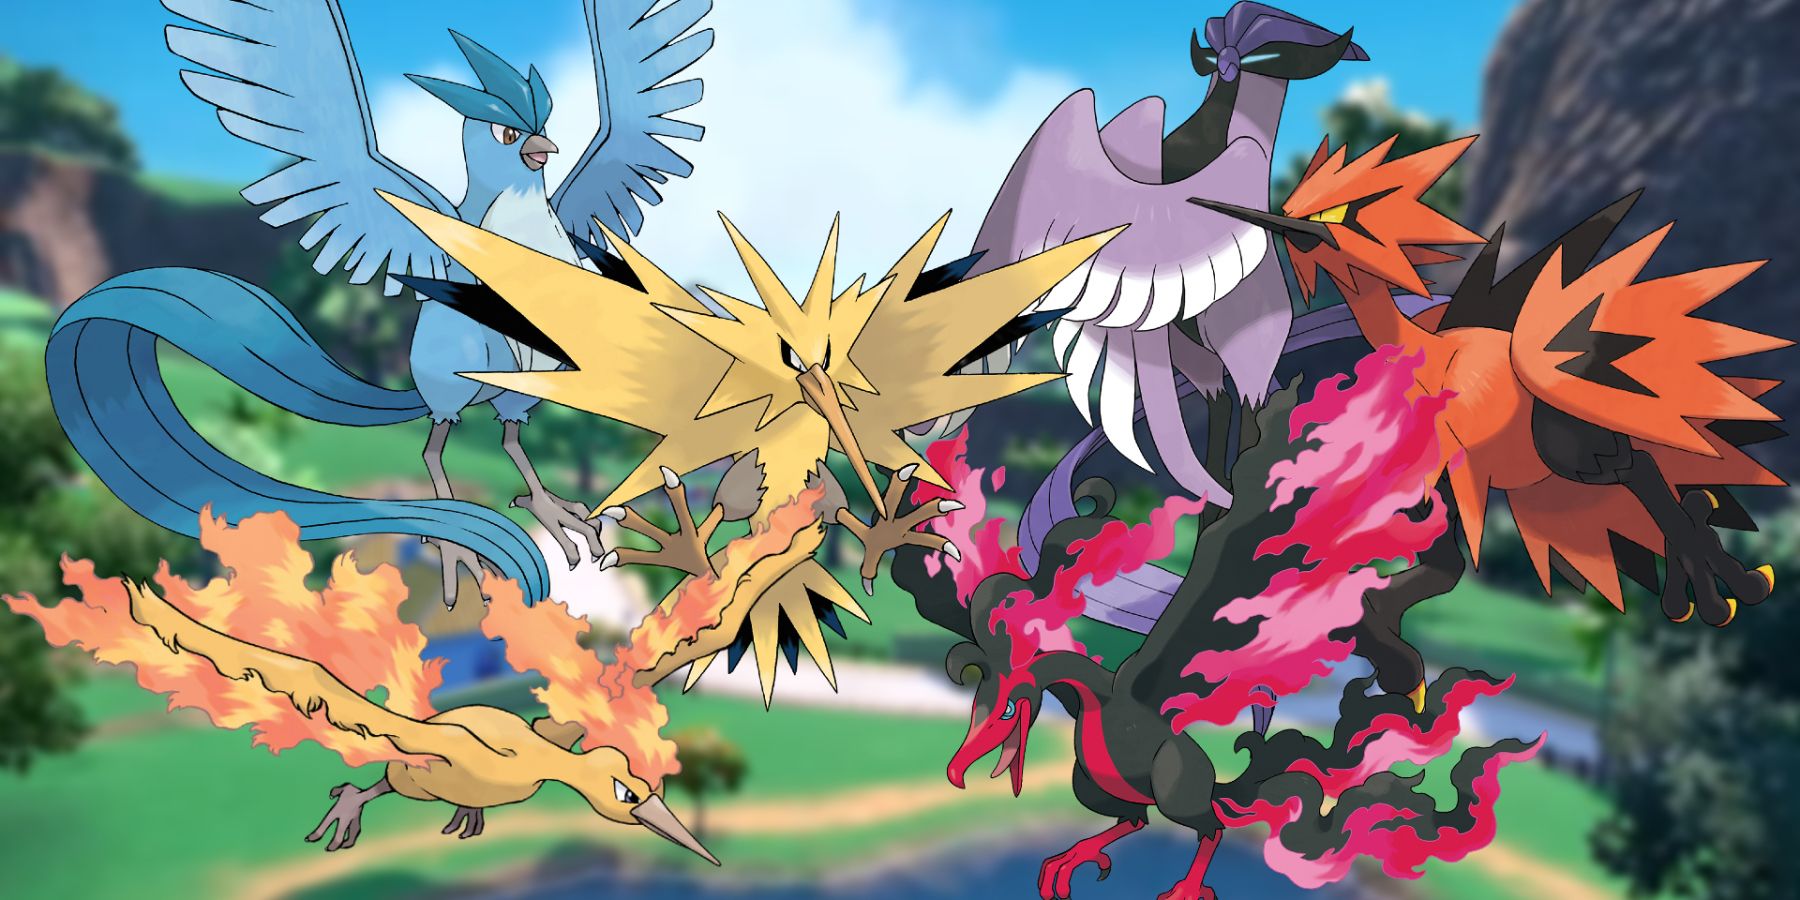 THE BEST OF THE GEN 5 LEGENDARIES! WILL THEY BEAT THE CURRENT TOP